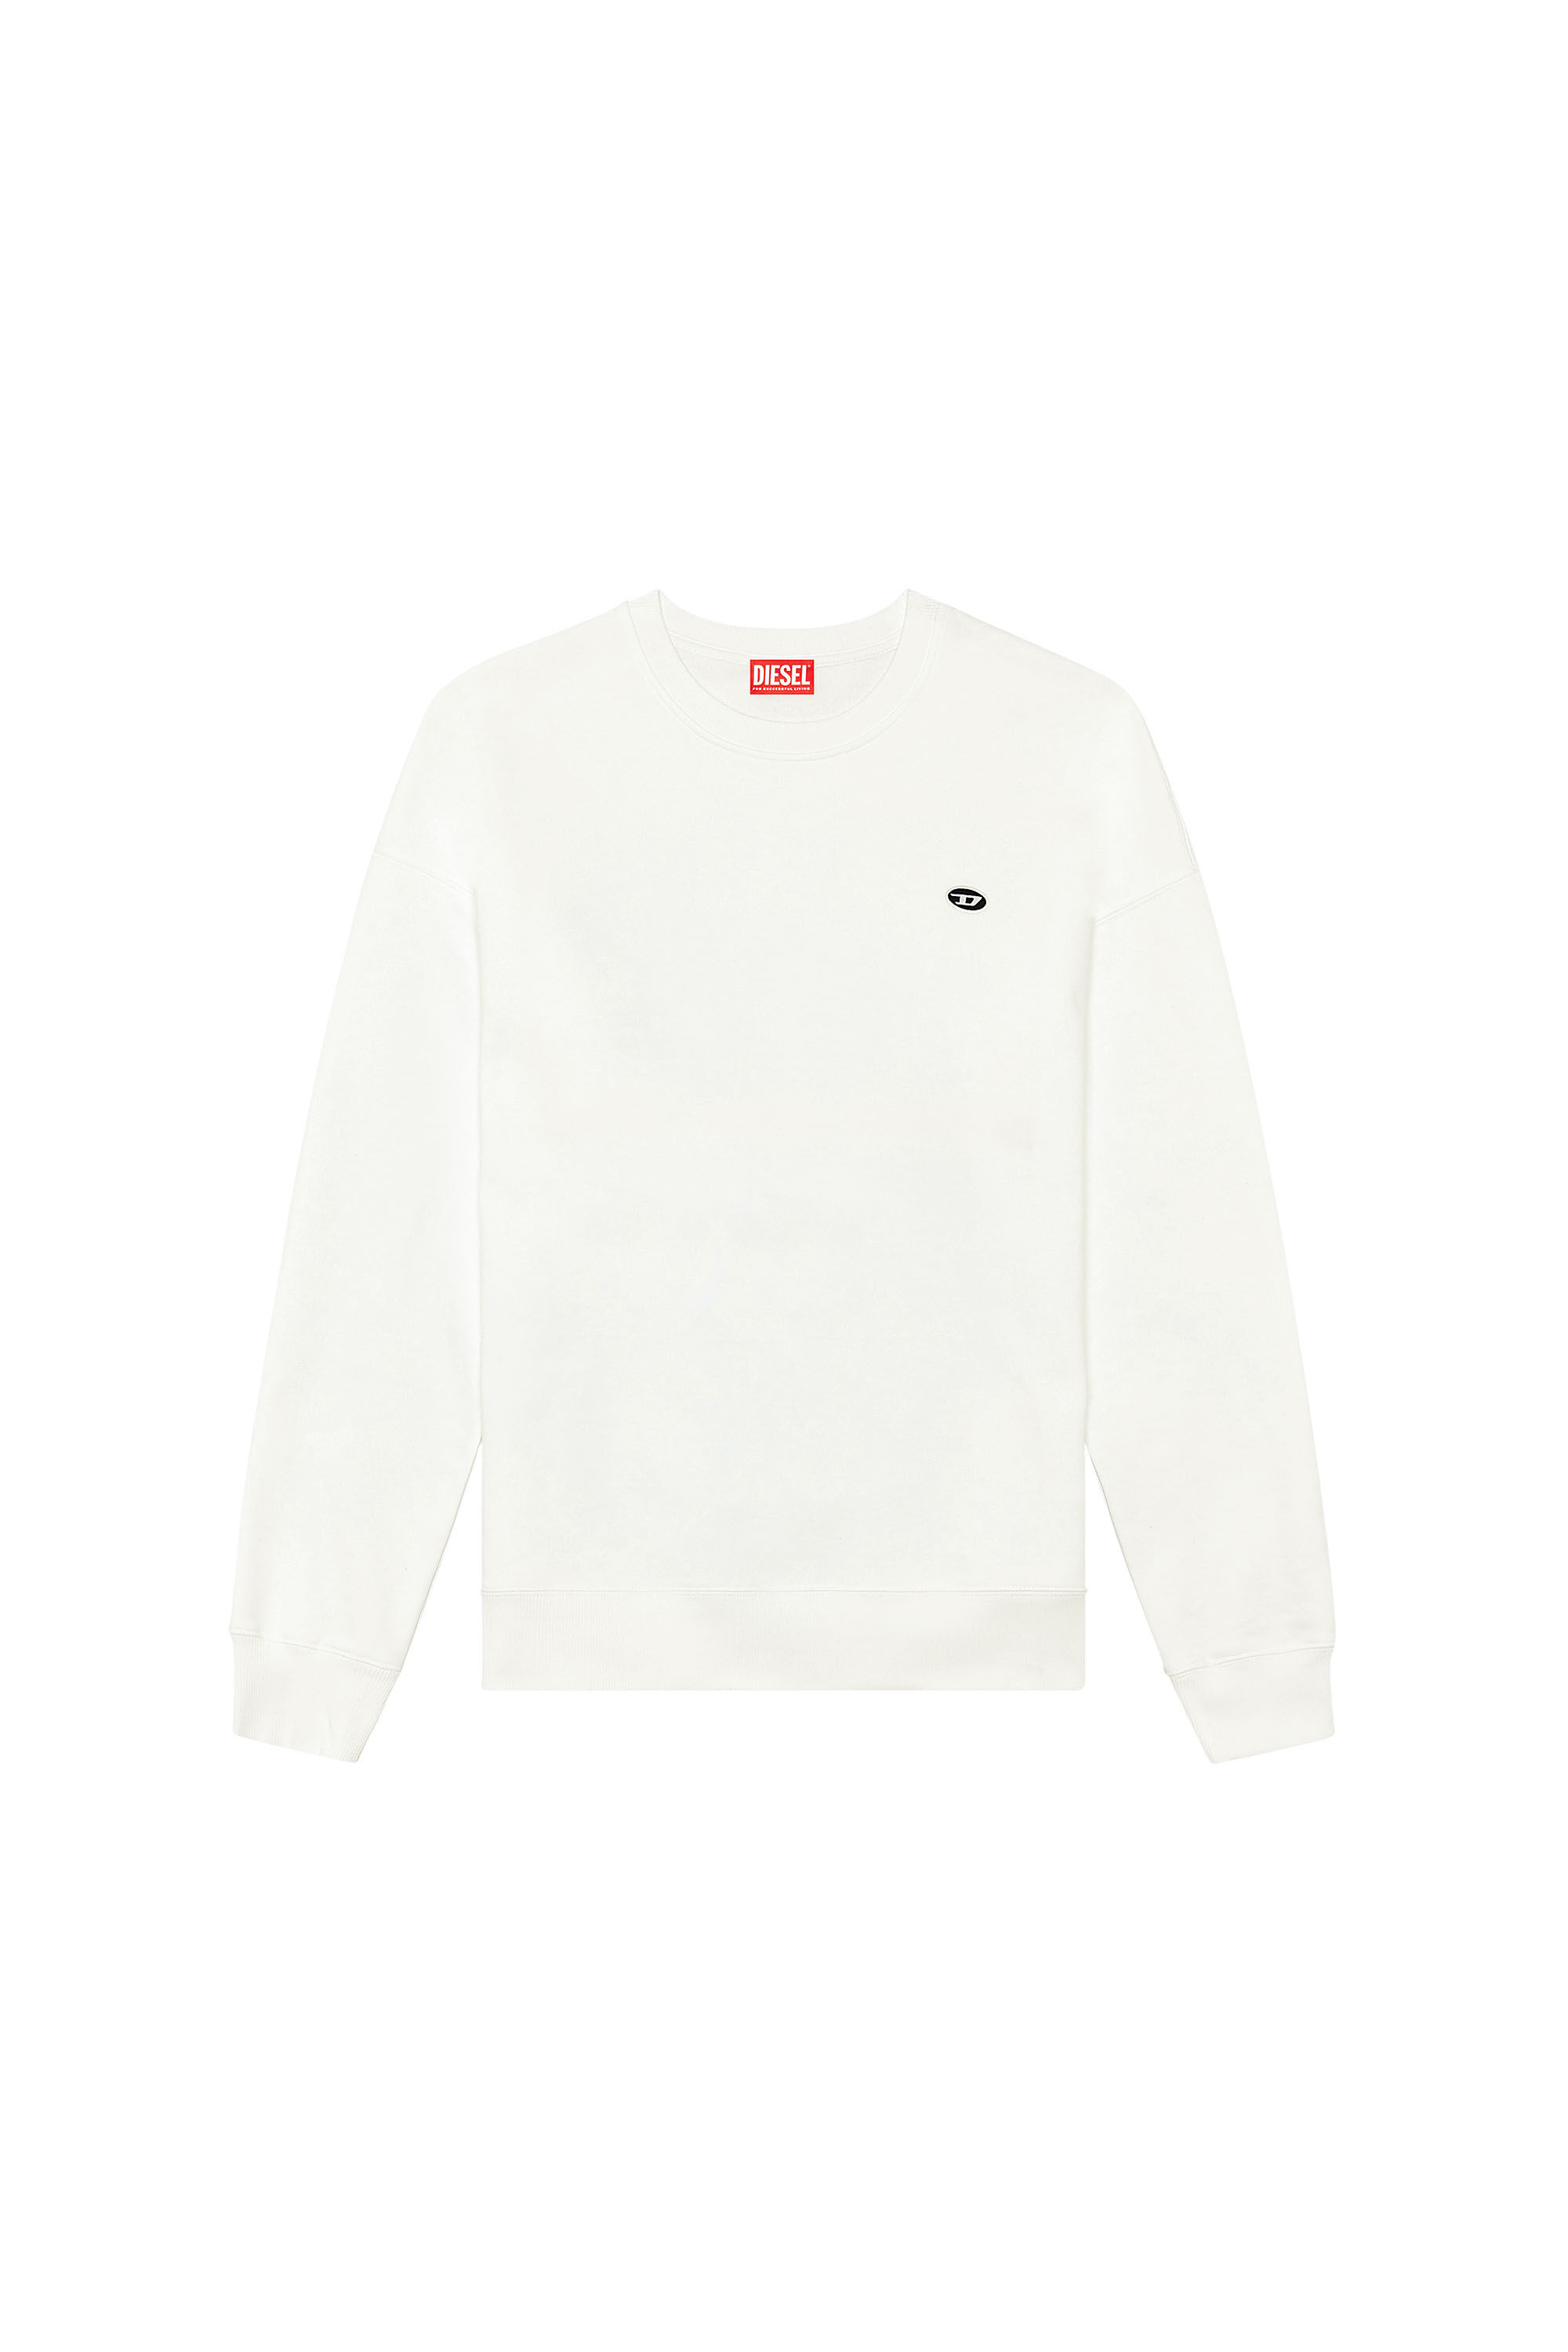 Diesel - S-ROB-DOVAL-PJ, Man Sweatshirt with oval D patch in White - Image 2